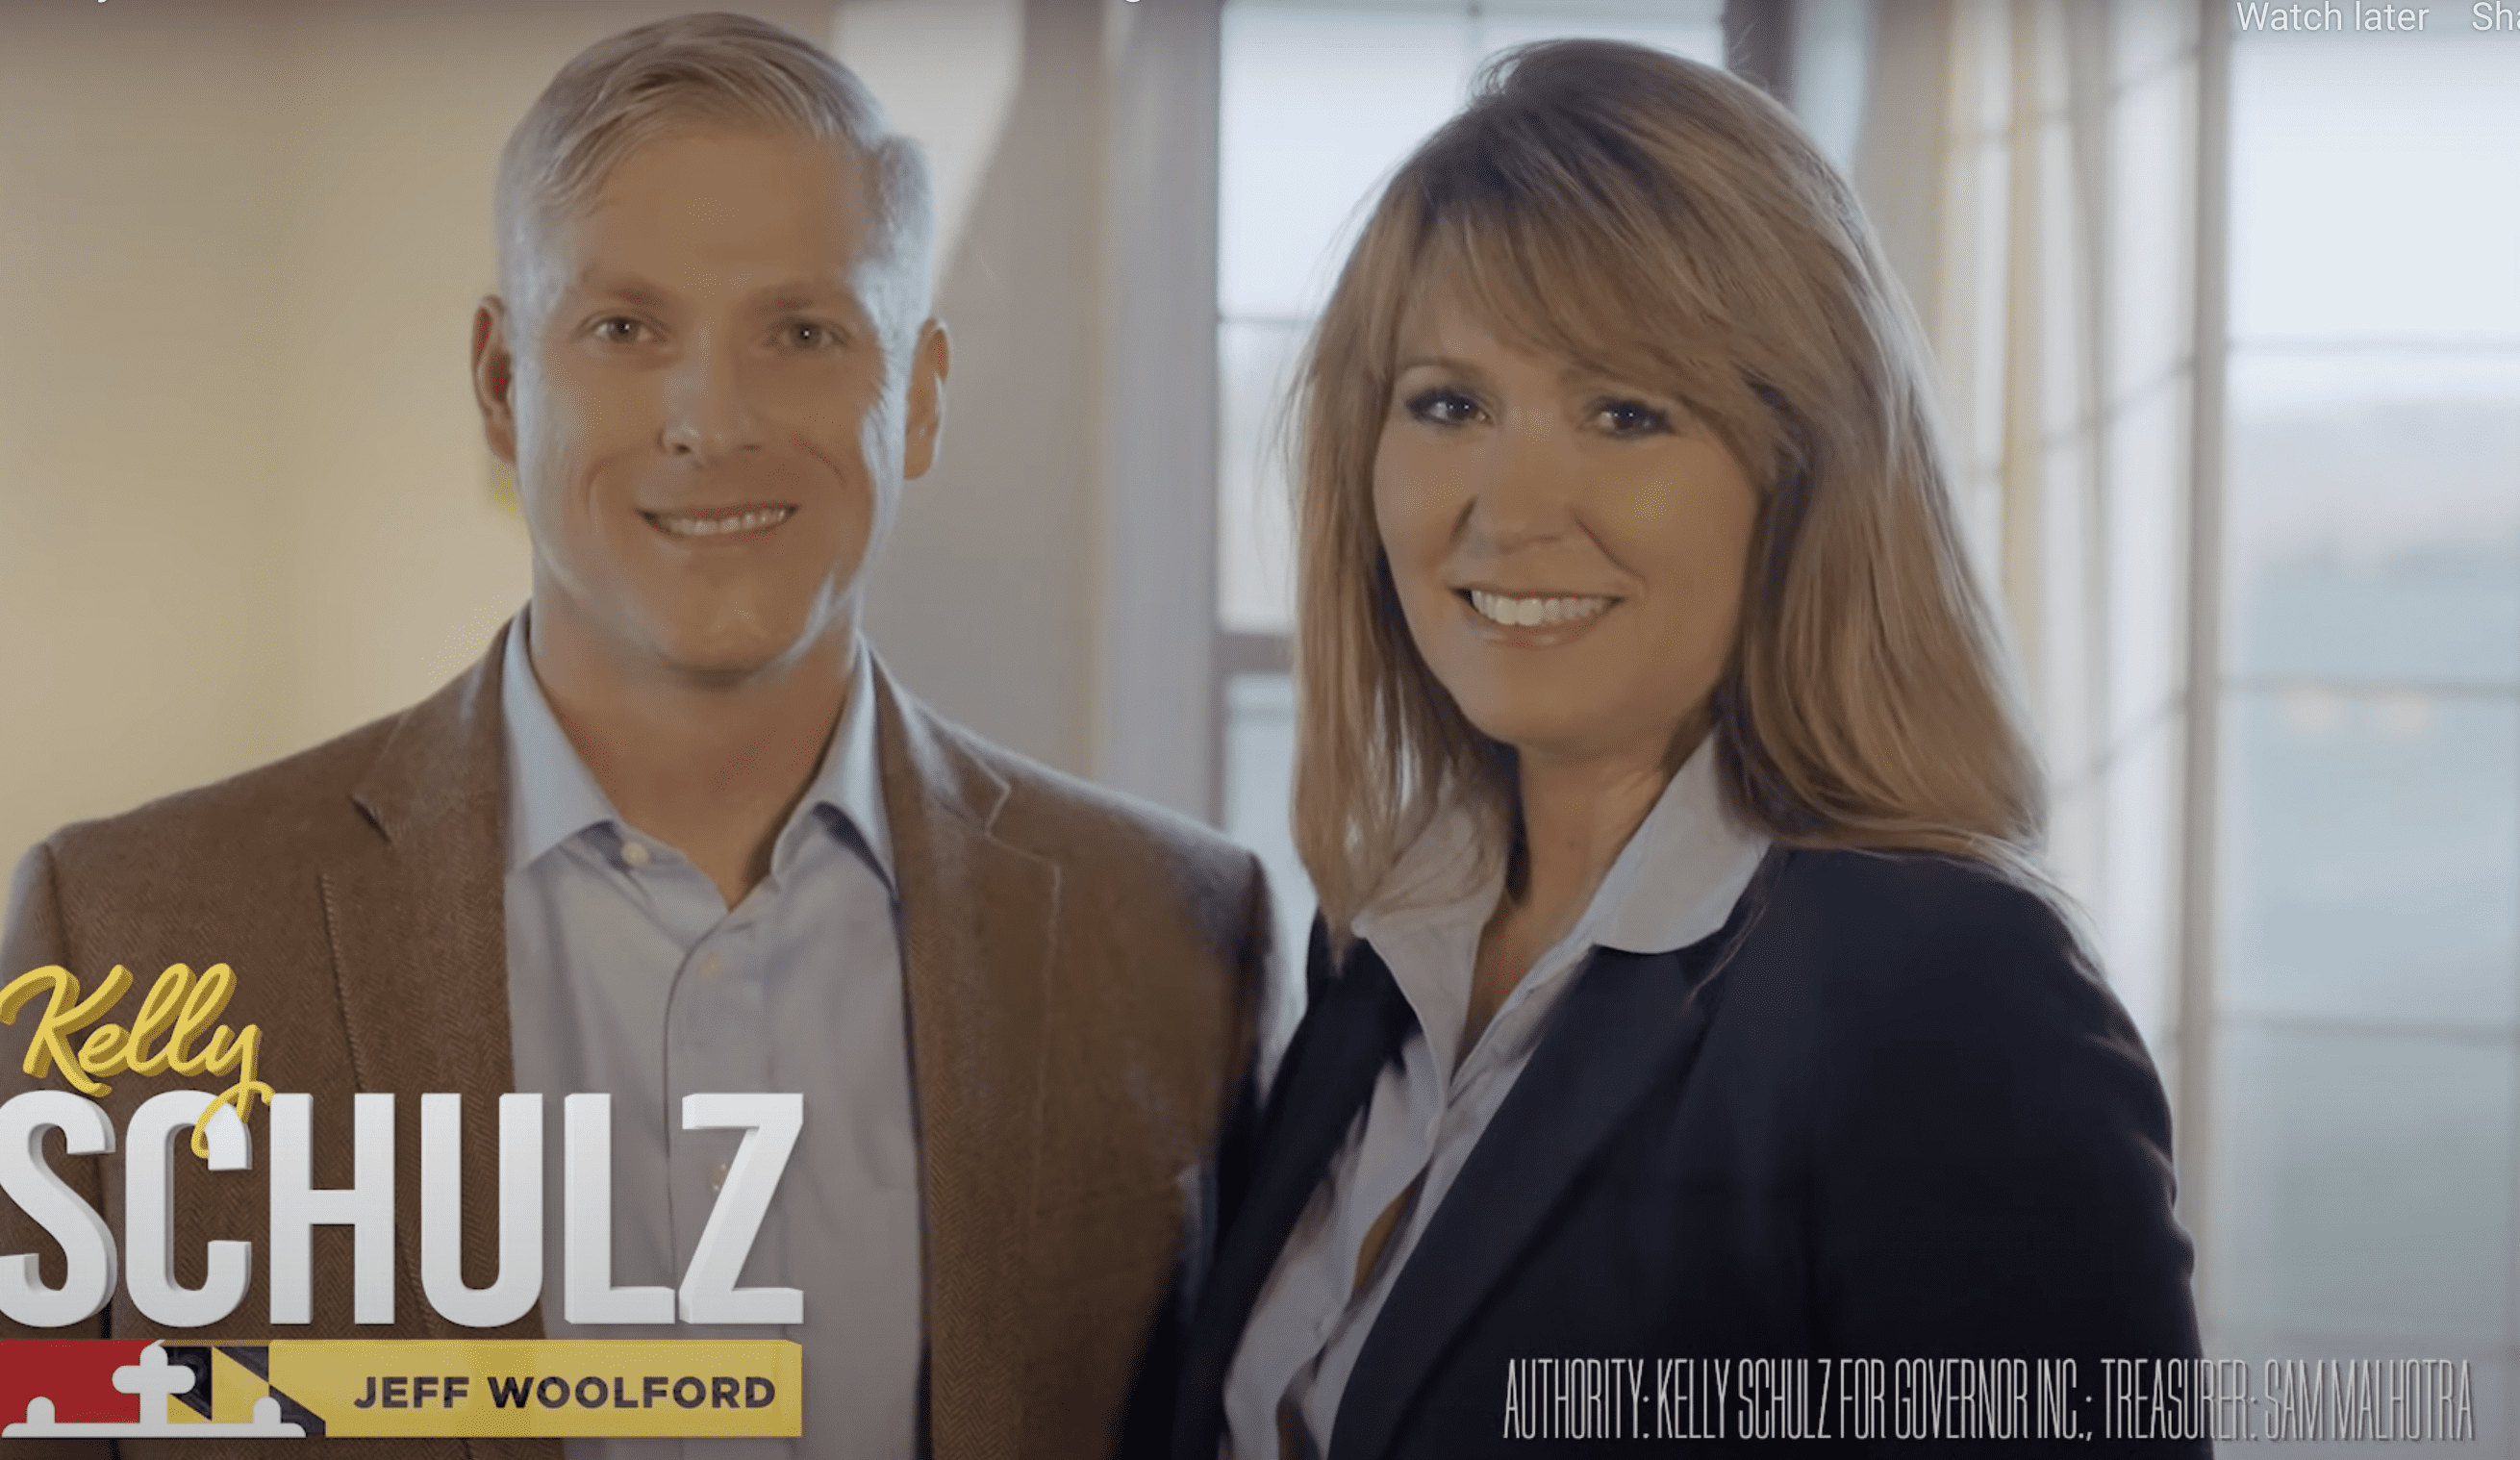 Schulz and Woolford are running for governor